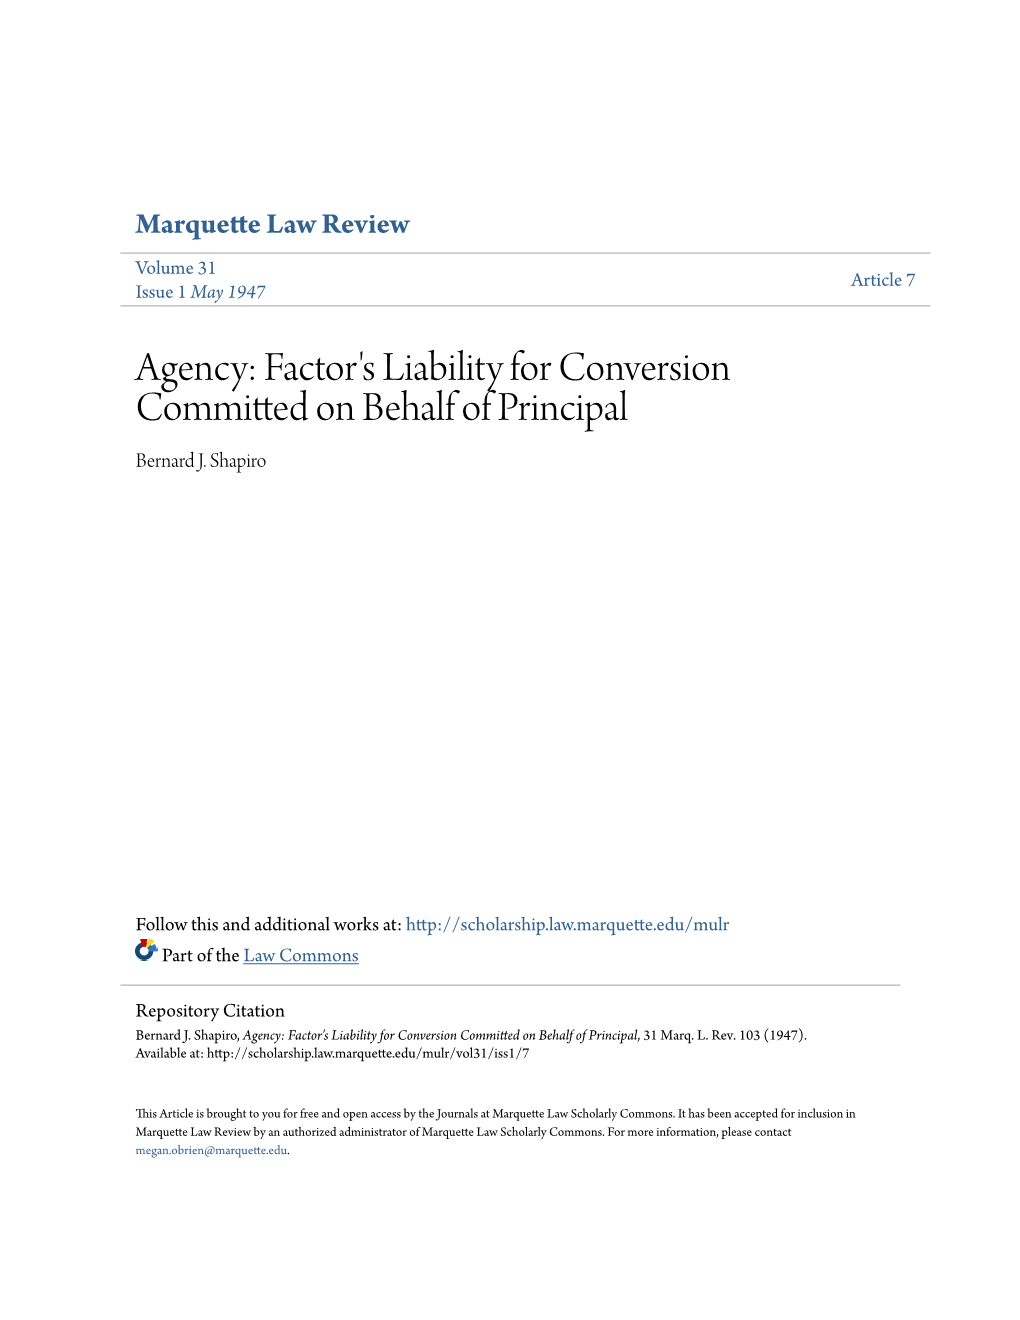 Agency: Factor's Liability for Conversion Committed on Behalf of Principal Bernard J